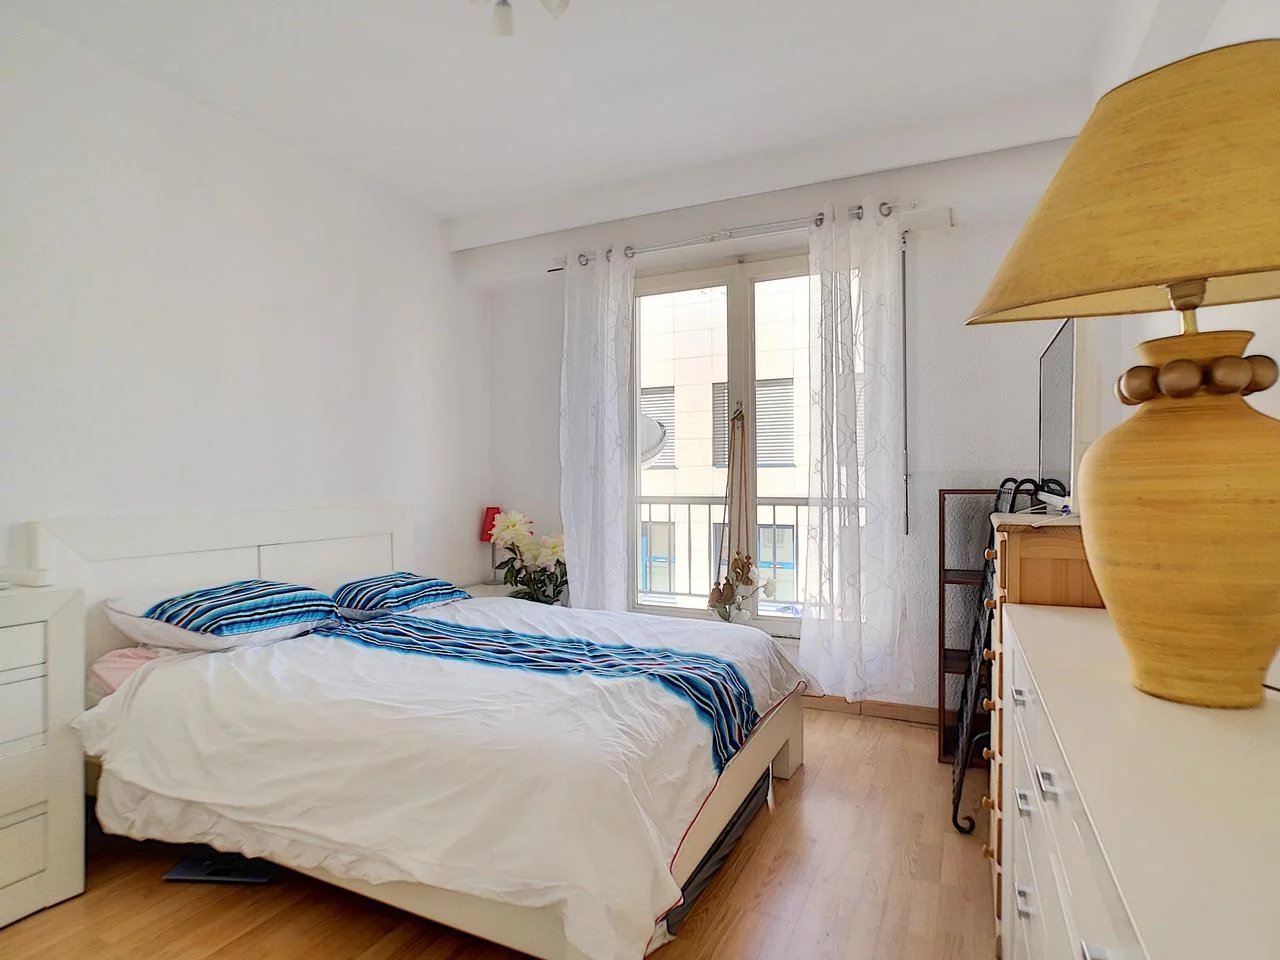 Appartement  2 Rooms 46.88m2  for sale   329 000 €